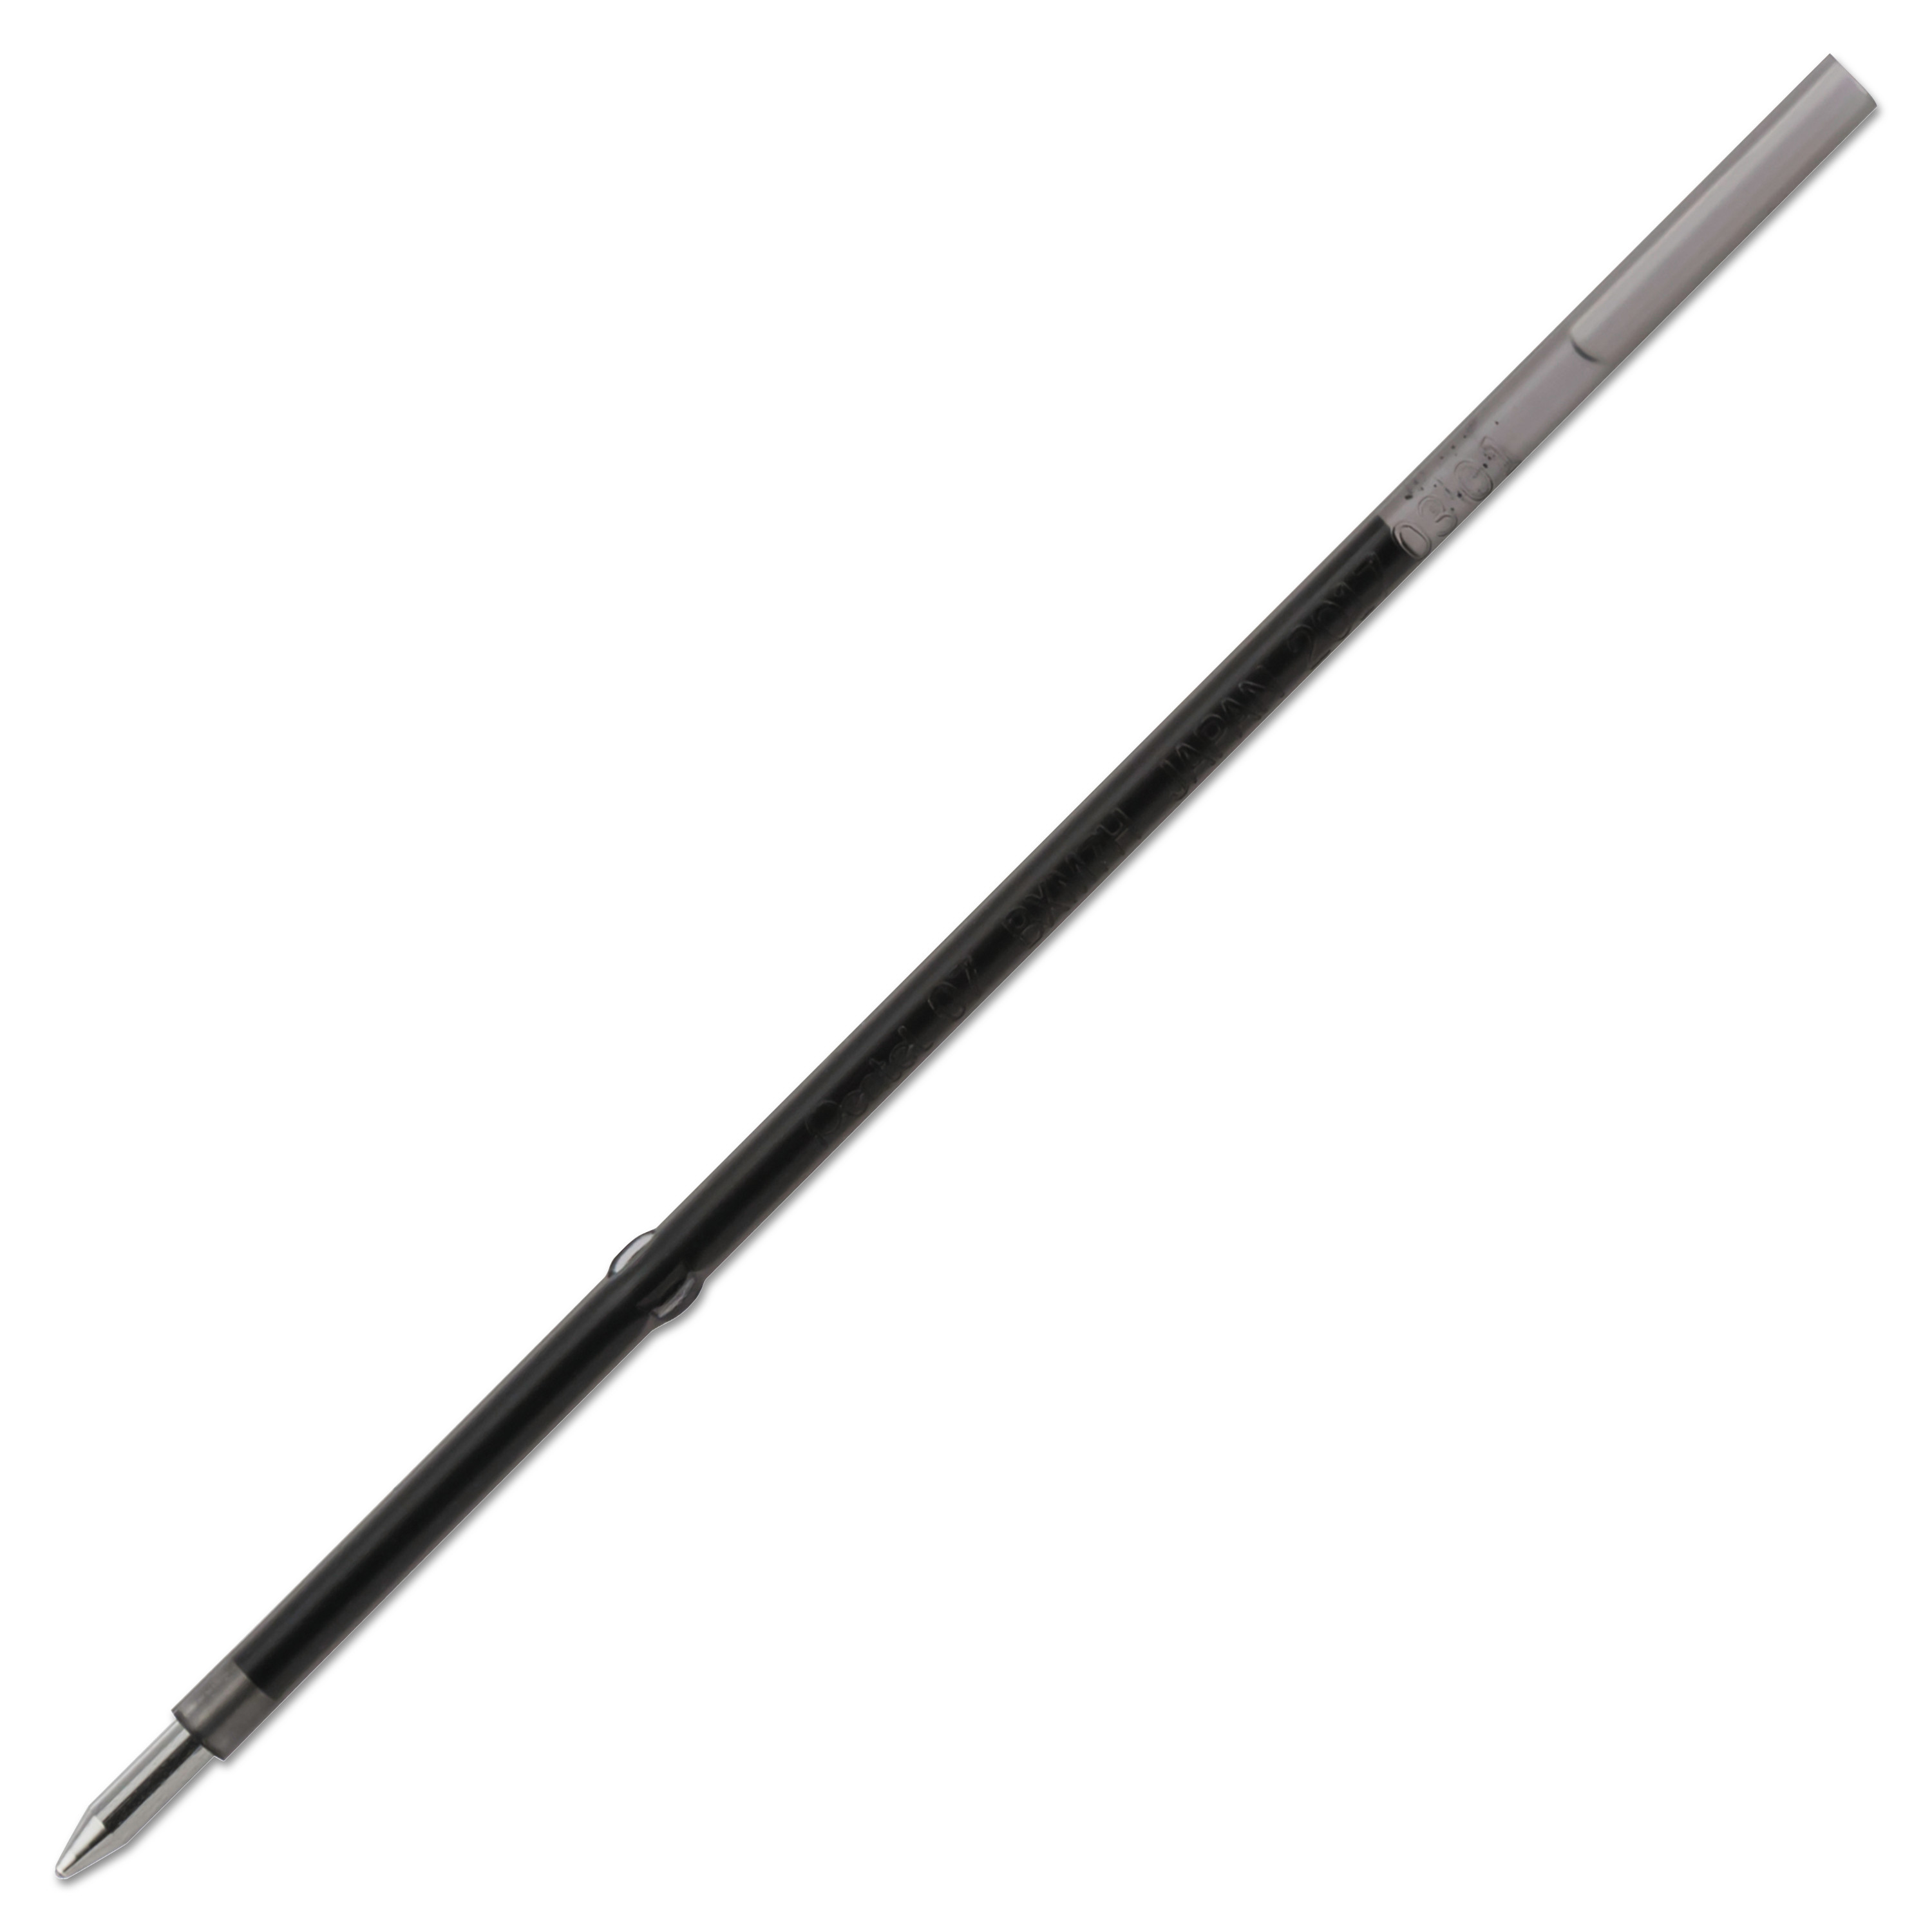 Refill for Vicua Advanced Ink Ballpoint Pen, Extra Fine, Black Ink